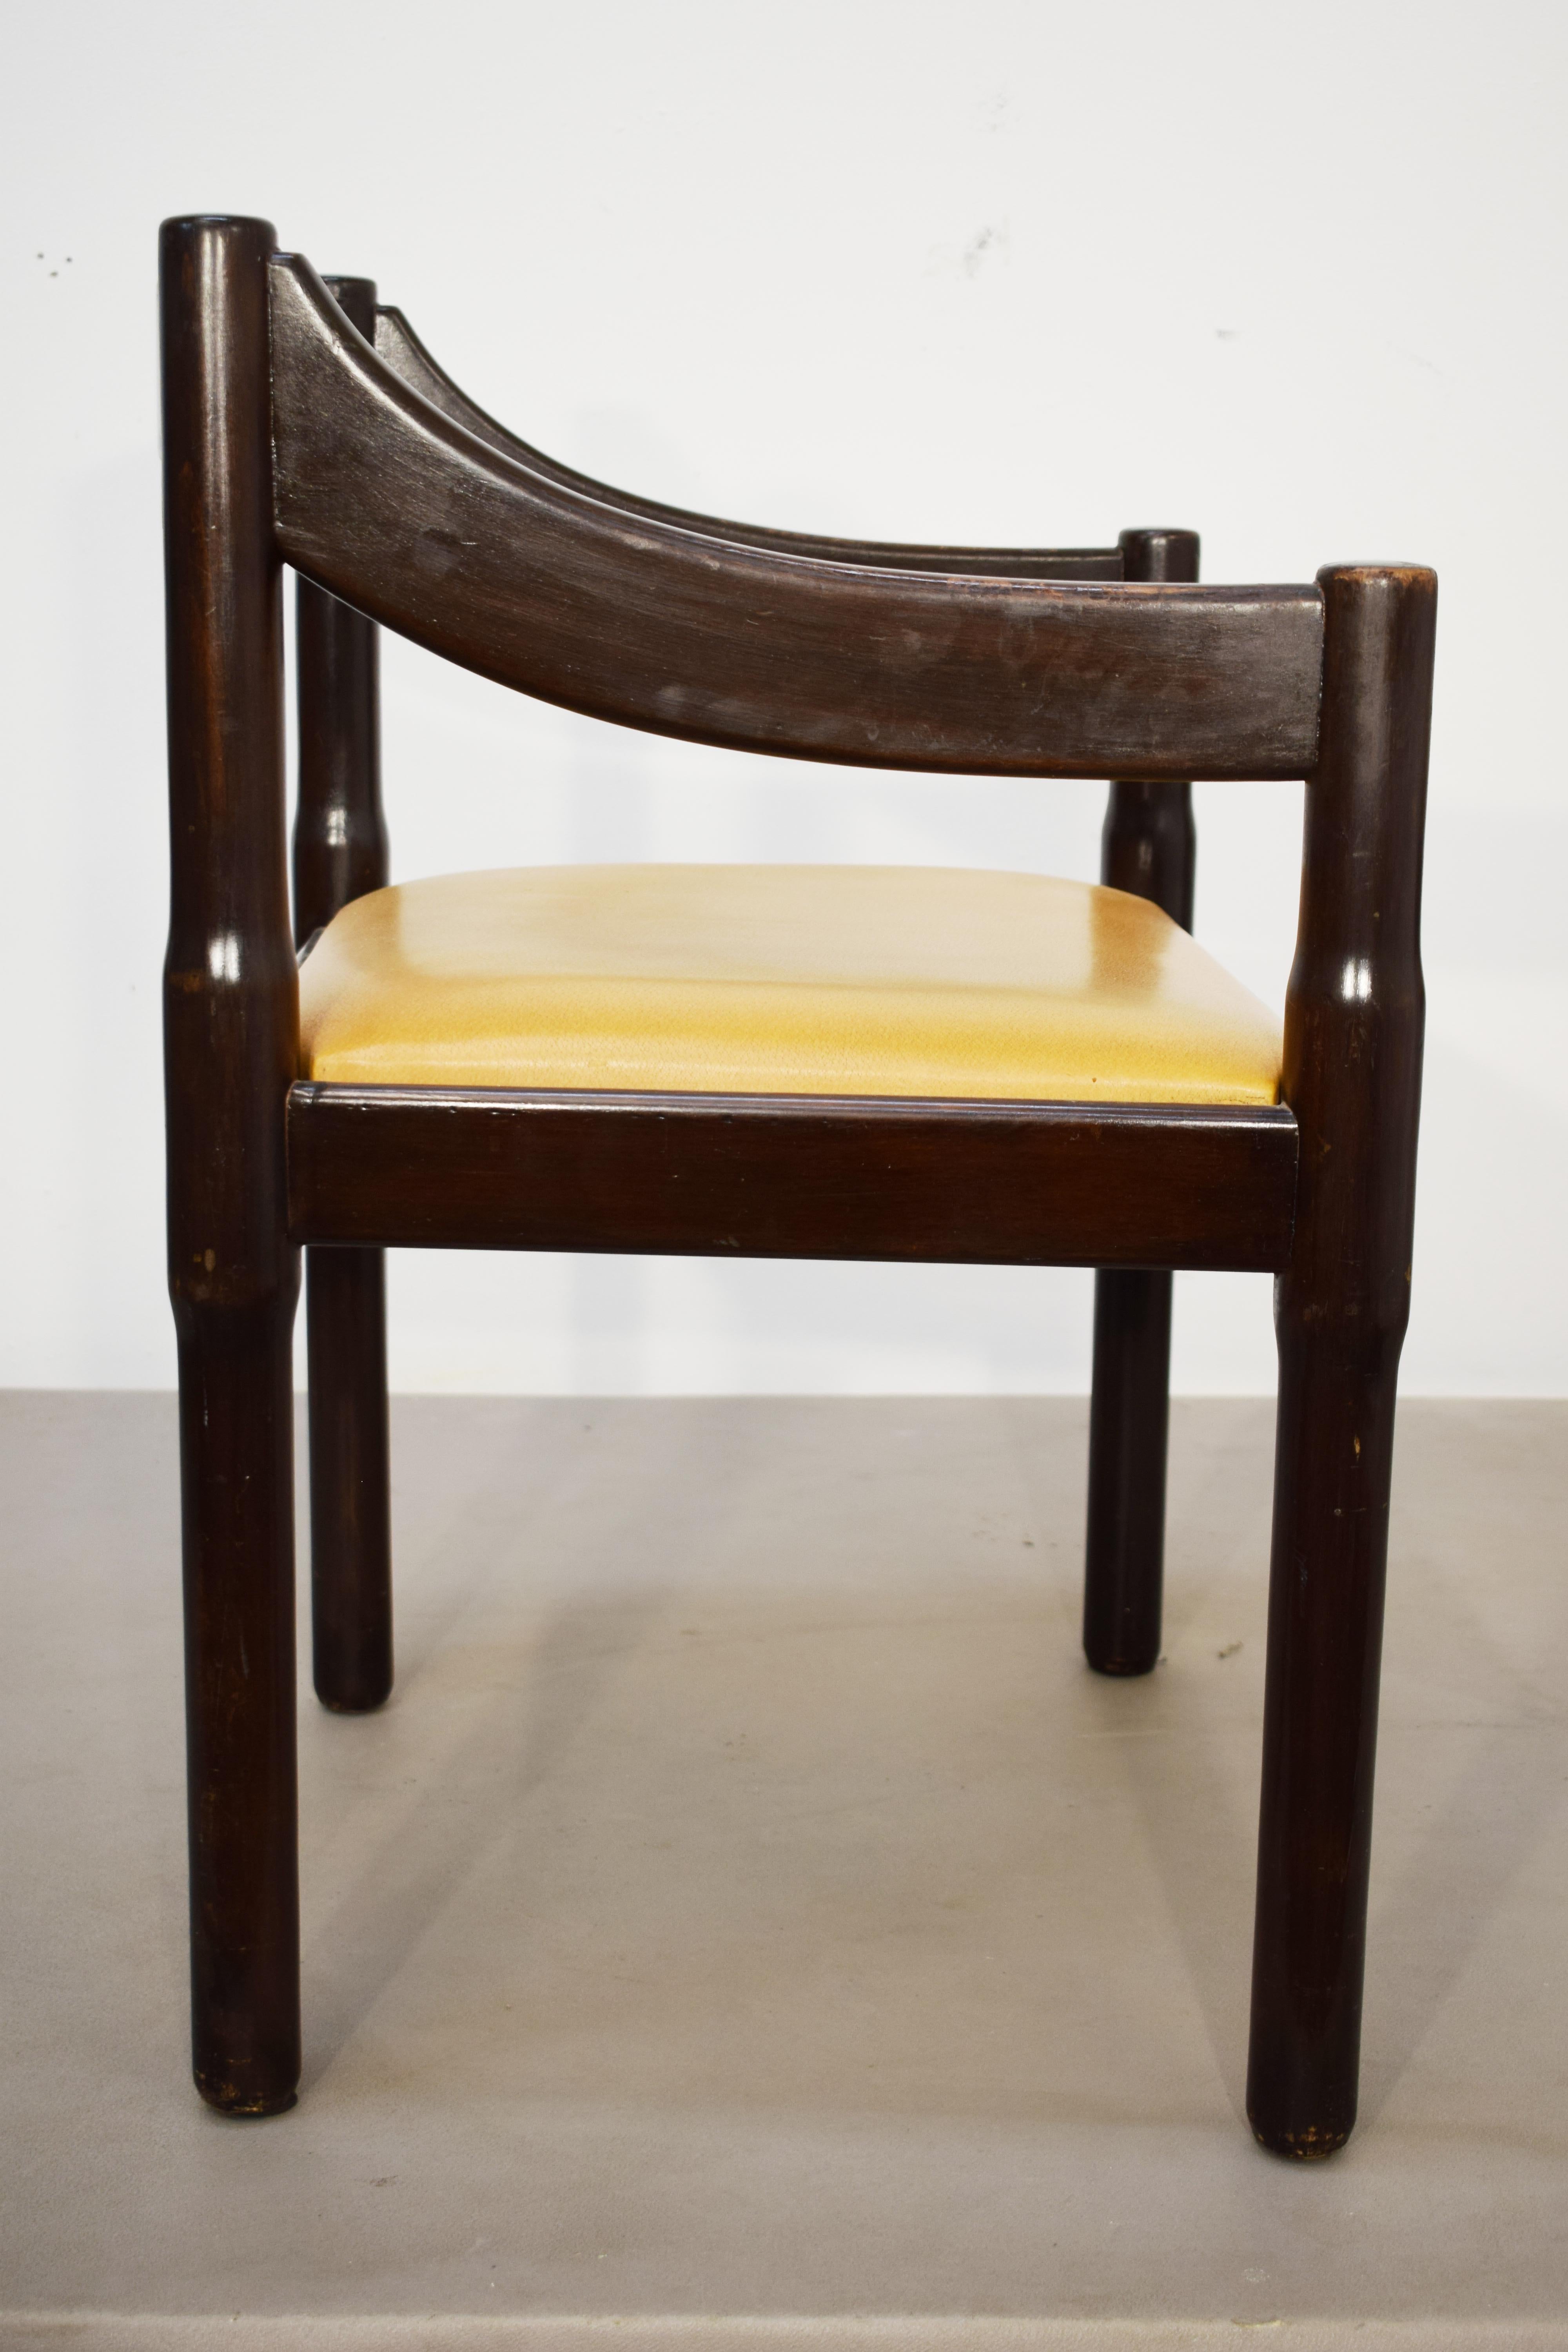 Set of 5 Carimate chairs by Vico Magistretti, Italy, 1960s For Sale 2